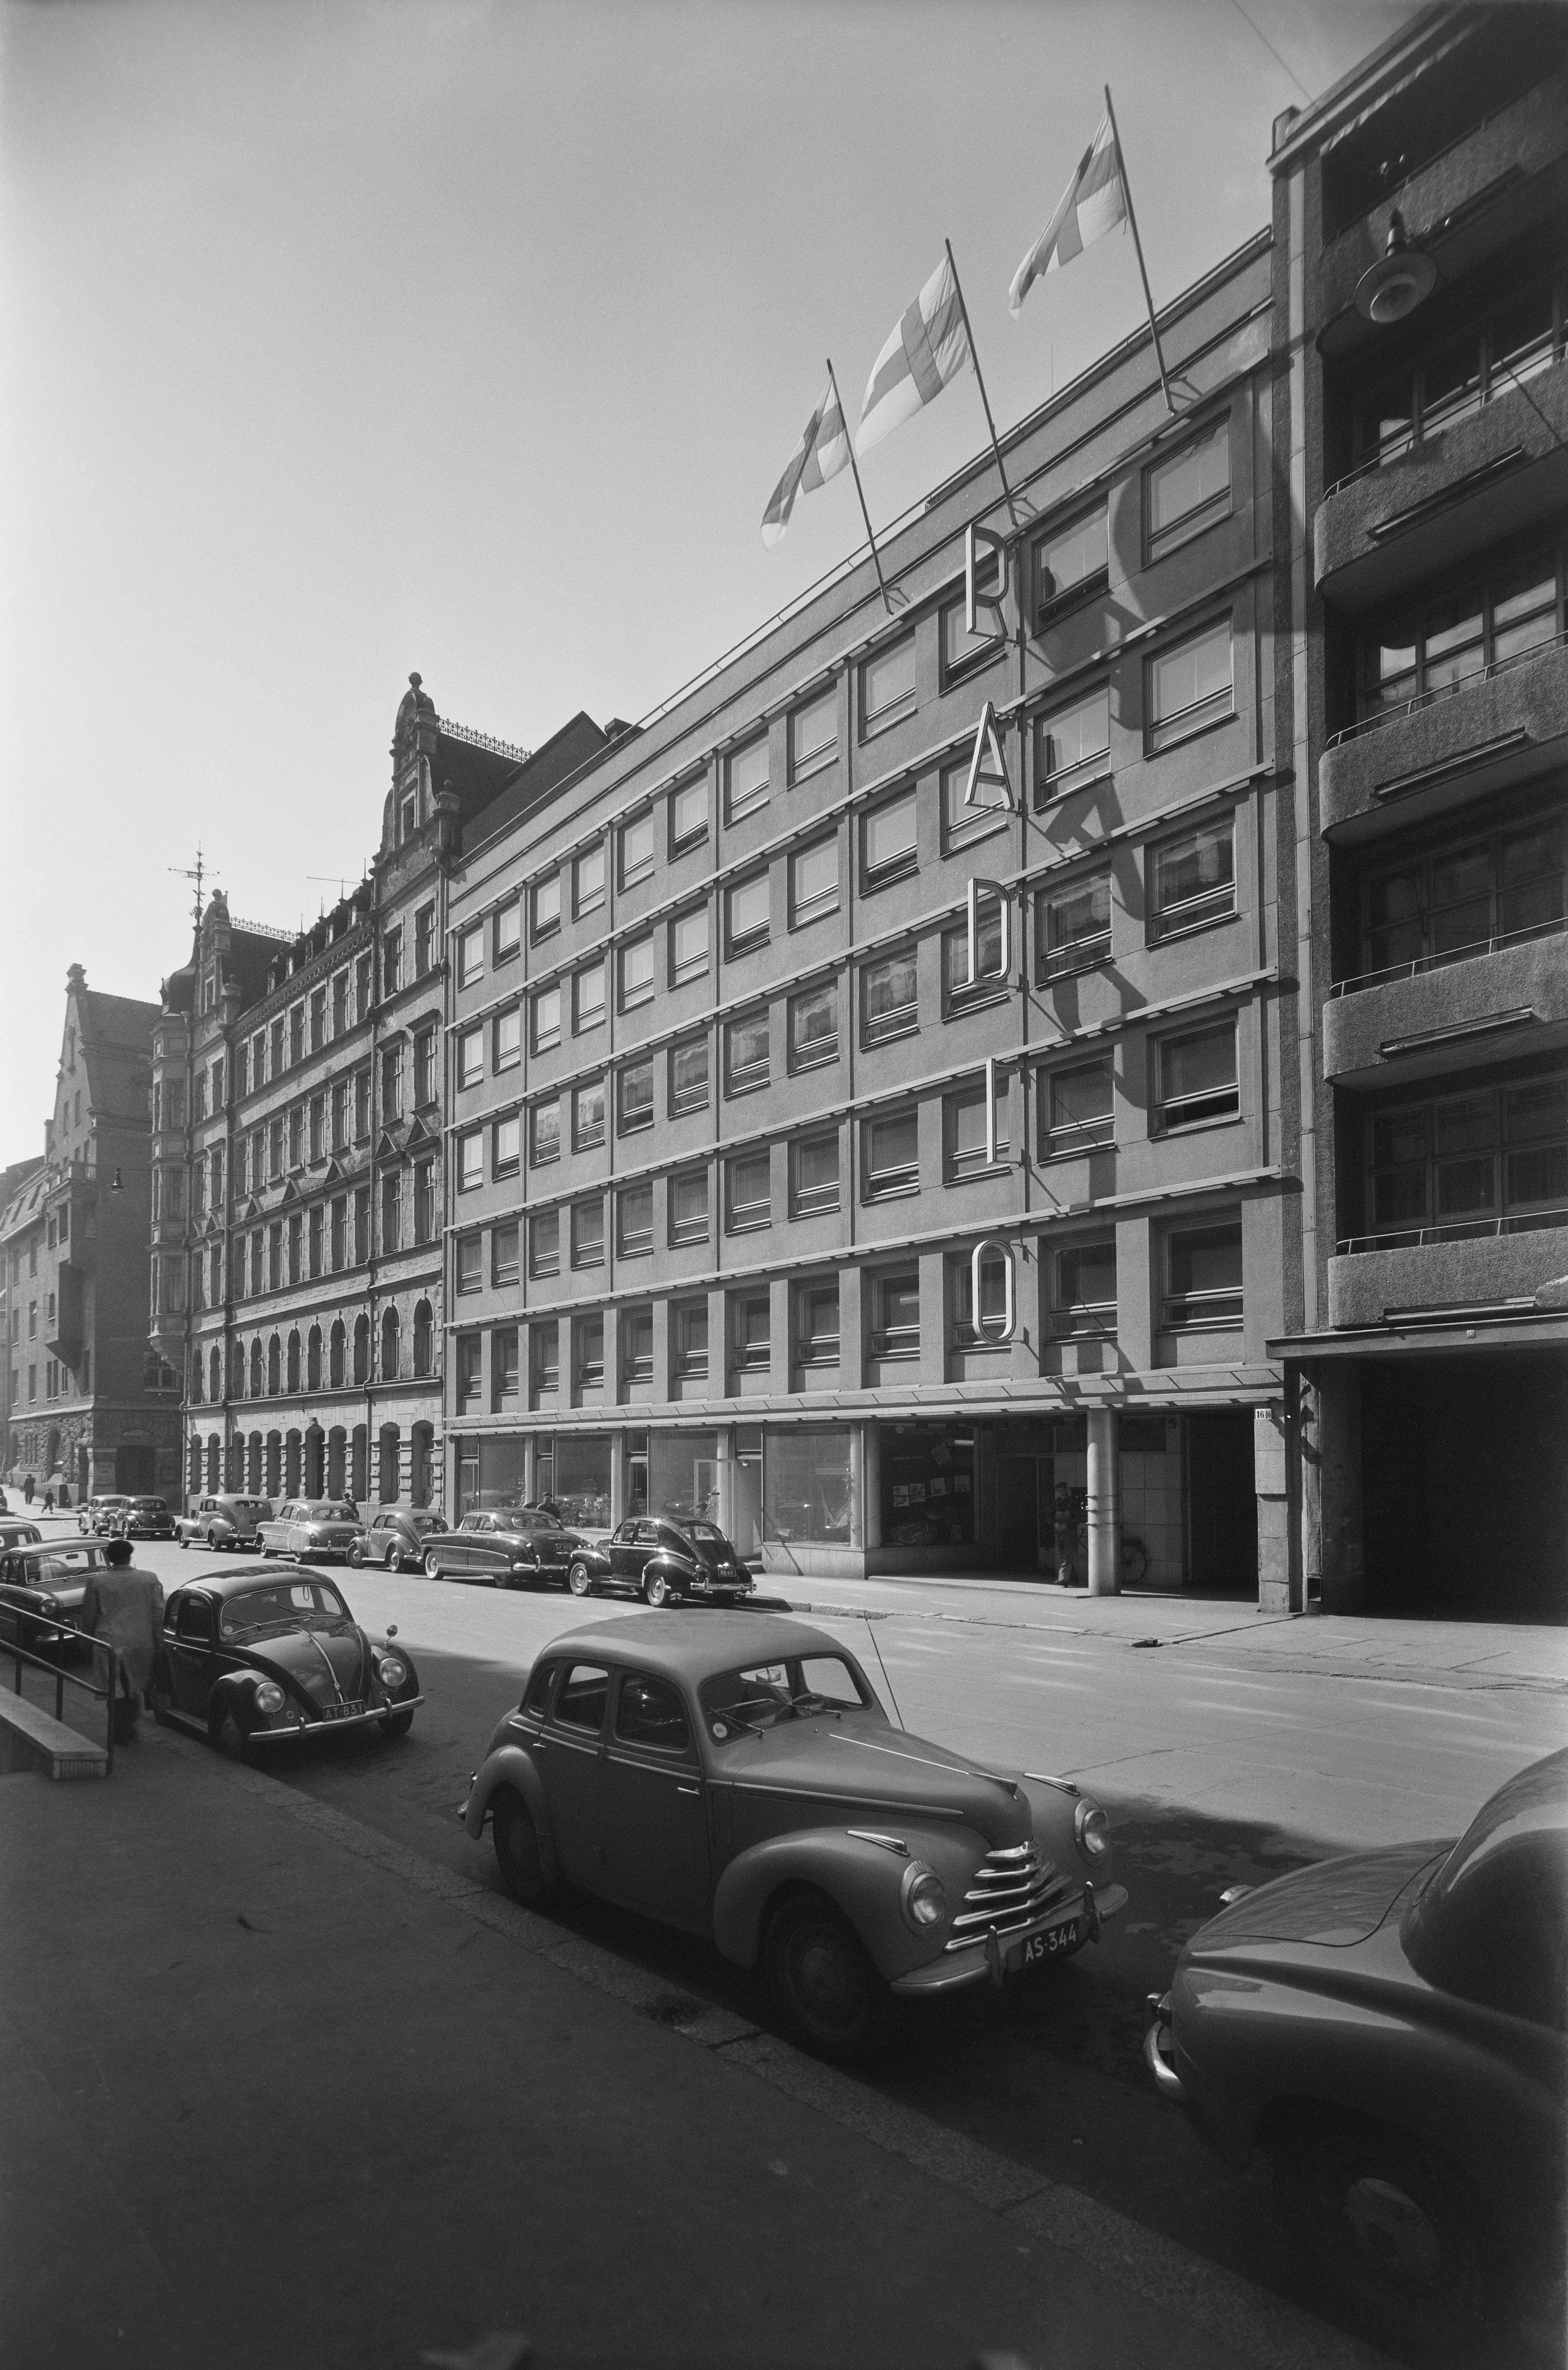 The Radio House, Unioninkatu, Helsinki, ca. 1953 - General Radio House, Unioninkatu 16 in Helsinki, on the wall of the building the text "radio", three Finnish flags in flagships, street view, cars parked on the street.